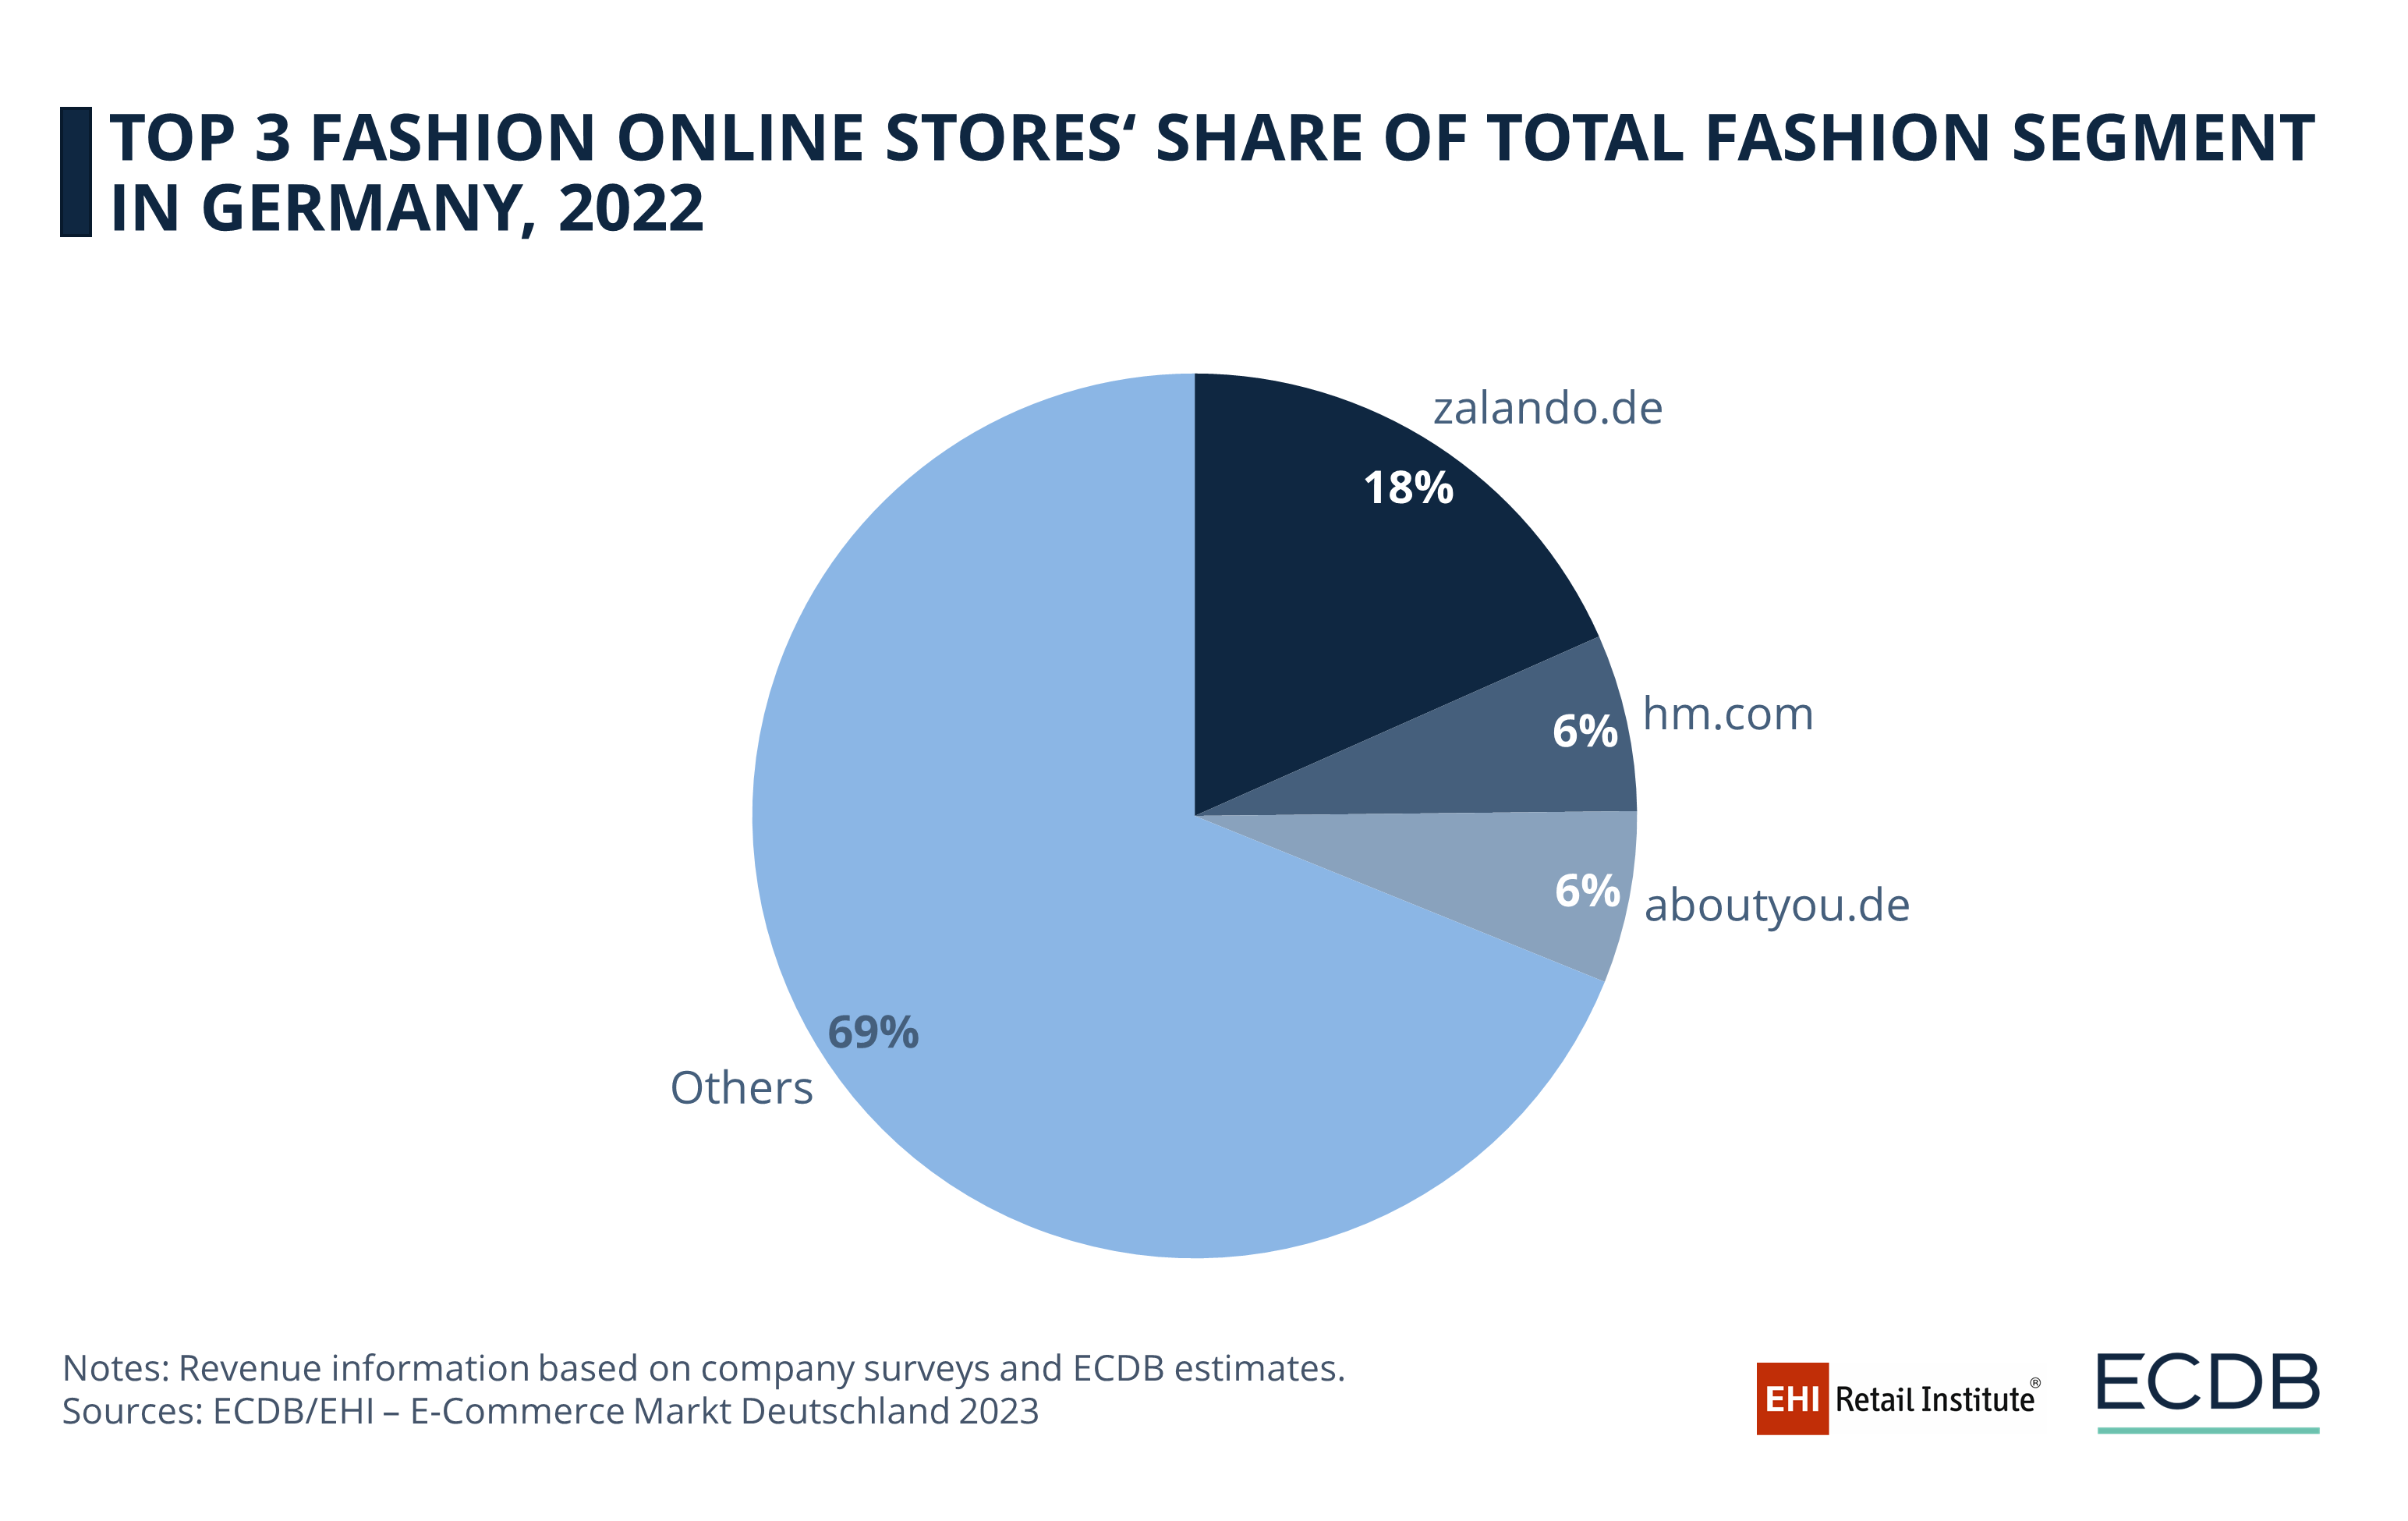 Top 3 Fashion Online Stores' Share of Total Fashion Segment in Germany, 2022